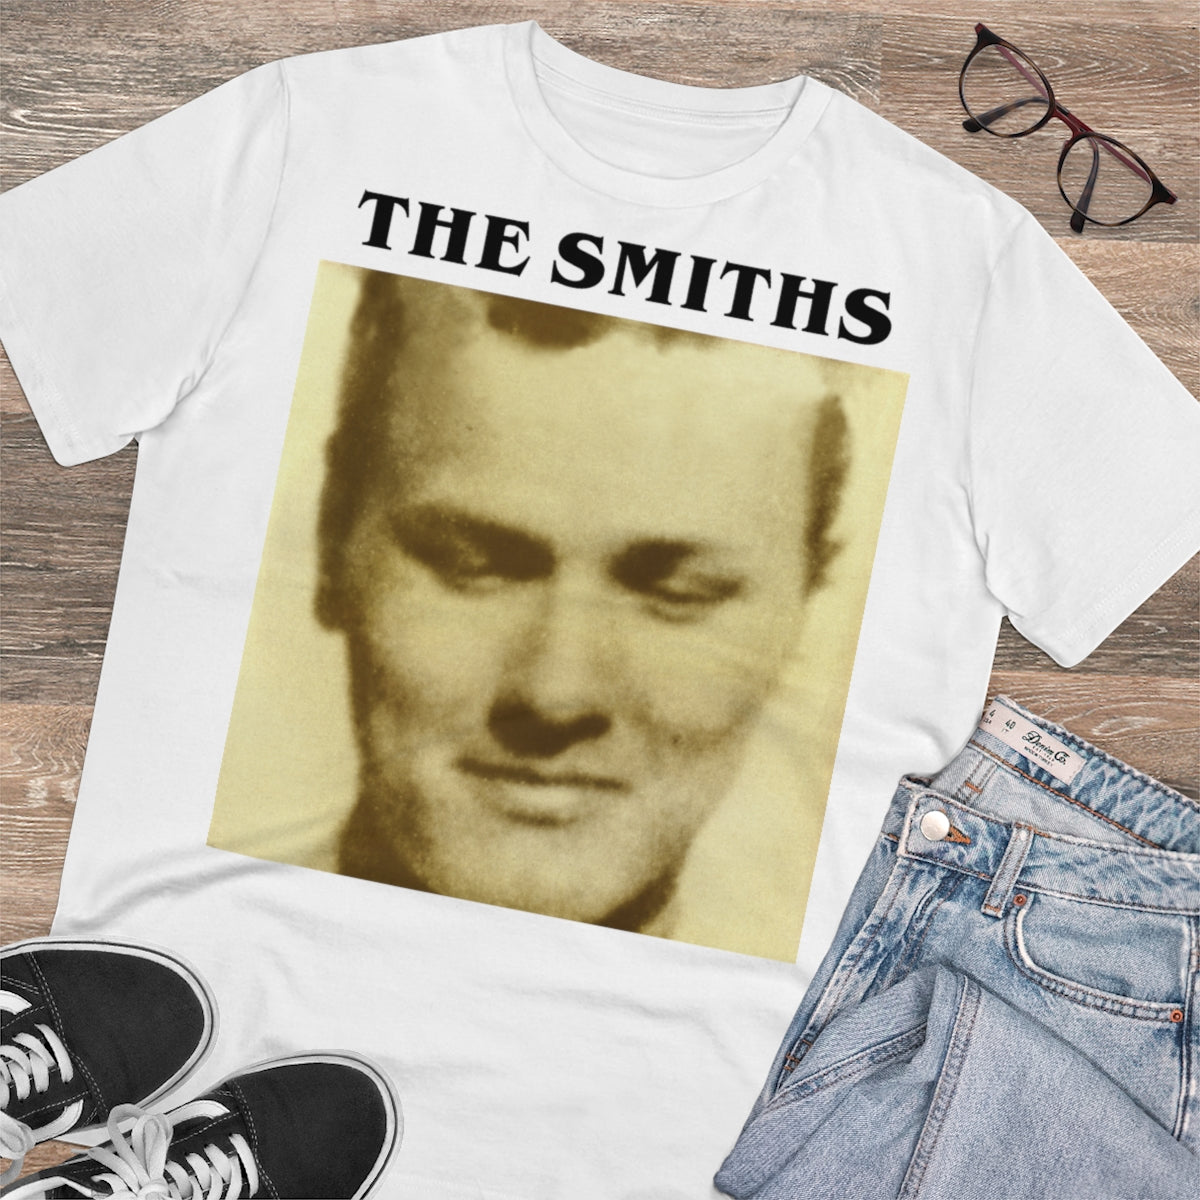 THE SMITHS - STRANGEWAYS, HERE WE COME - 1987 - Rough Trade Staff Promo